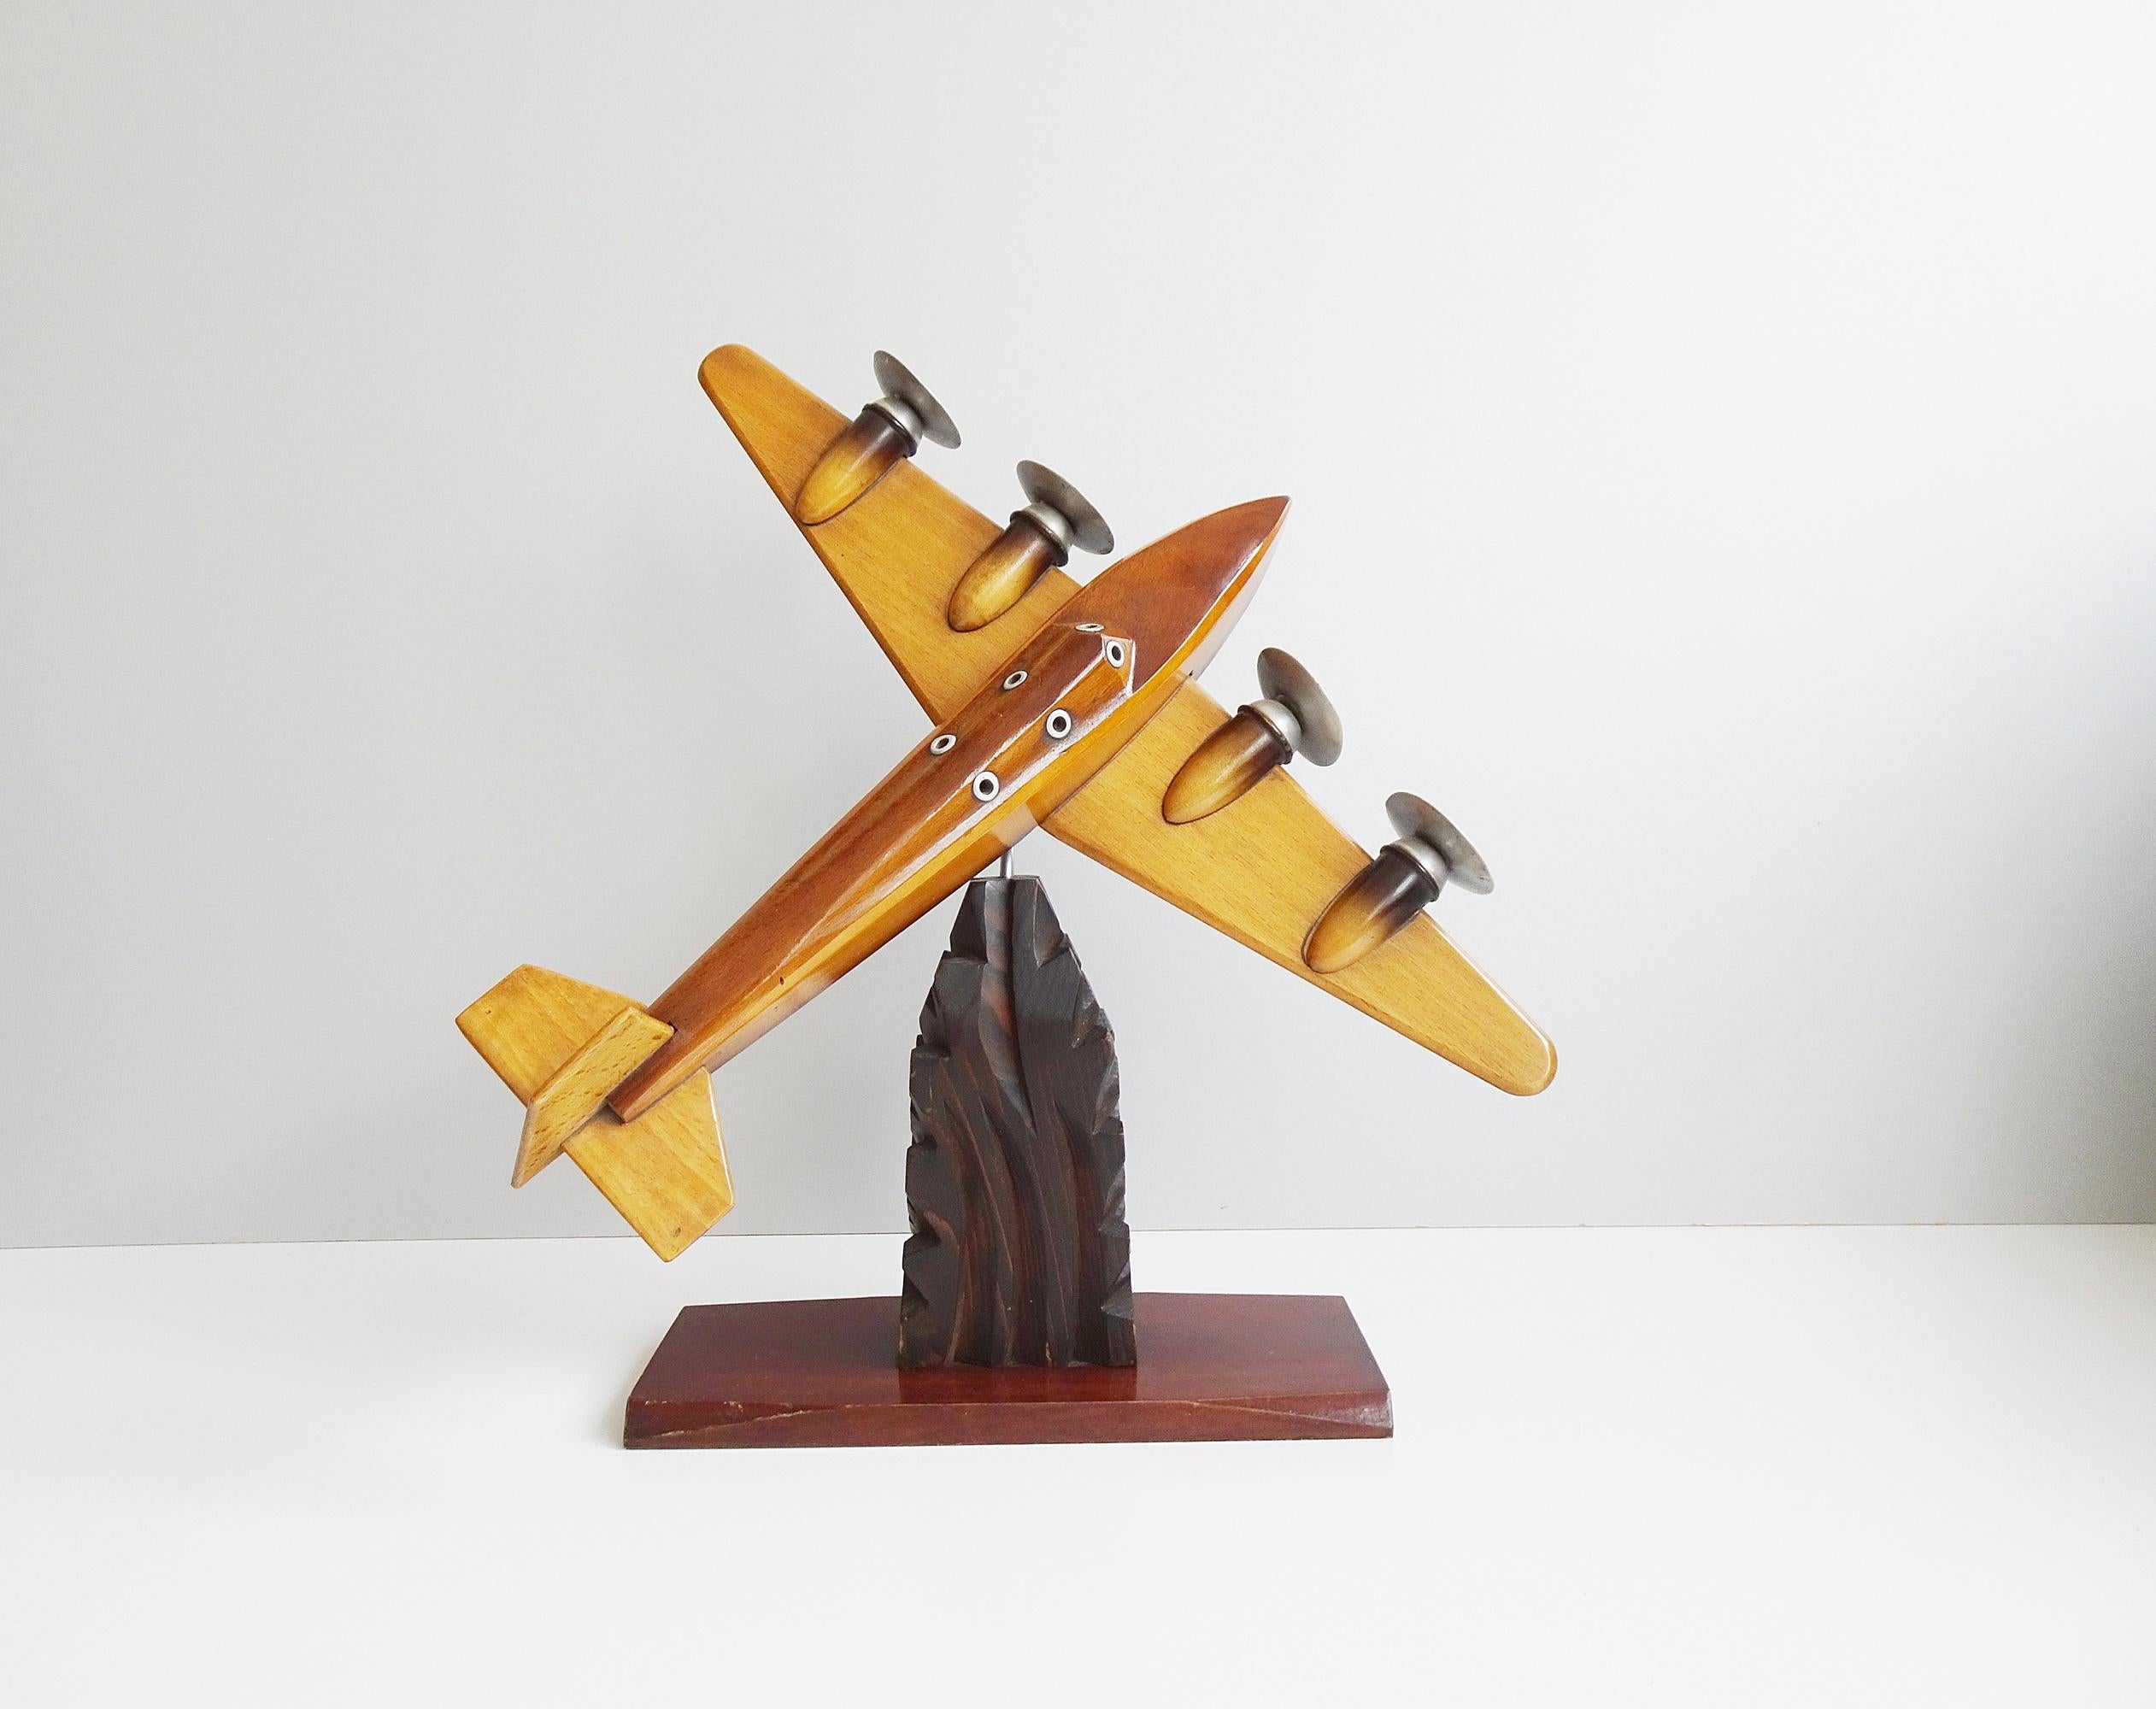 This wooden airplane is a handcrafted model airplane from the 1940s. The sculpture is built on a carved base with a 360 degree swivel joint. Turn it into high flyer, cross flyer or high flyer. High-quality processing of different woods, with fine